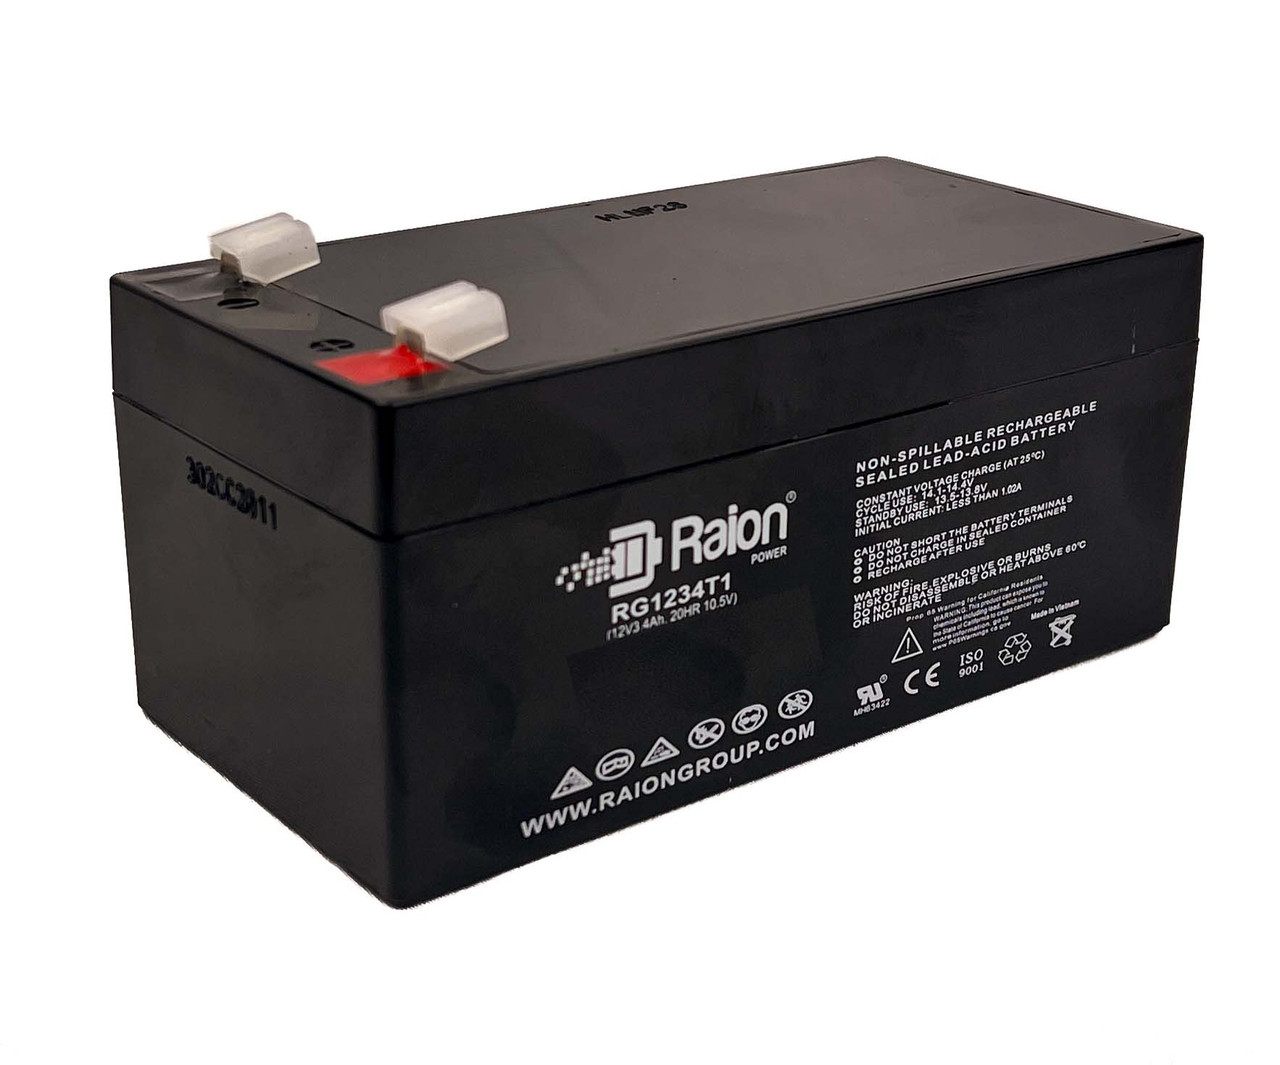 Raion Power 12V 3.4Ah Non-Spillable Replacement Battery for Q-Power QP12-3.3